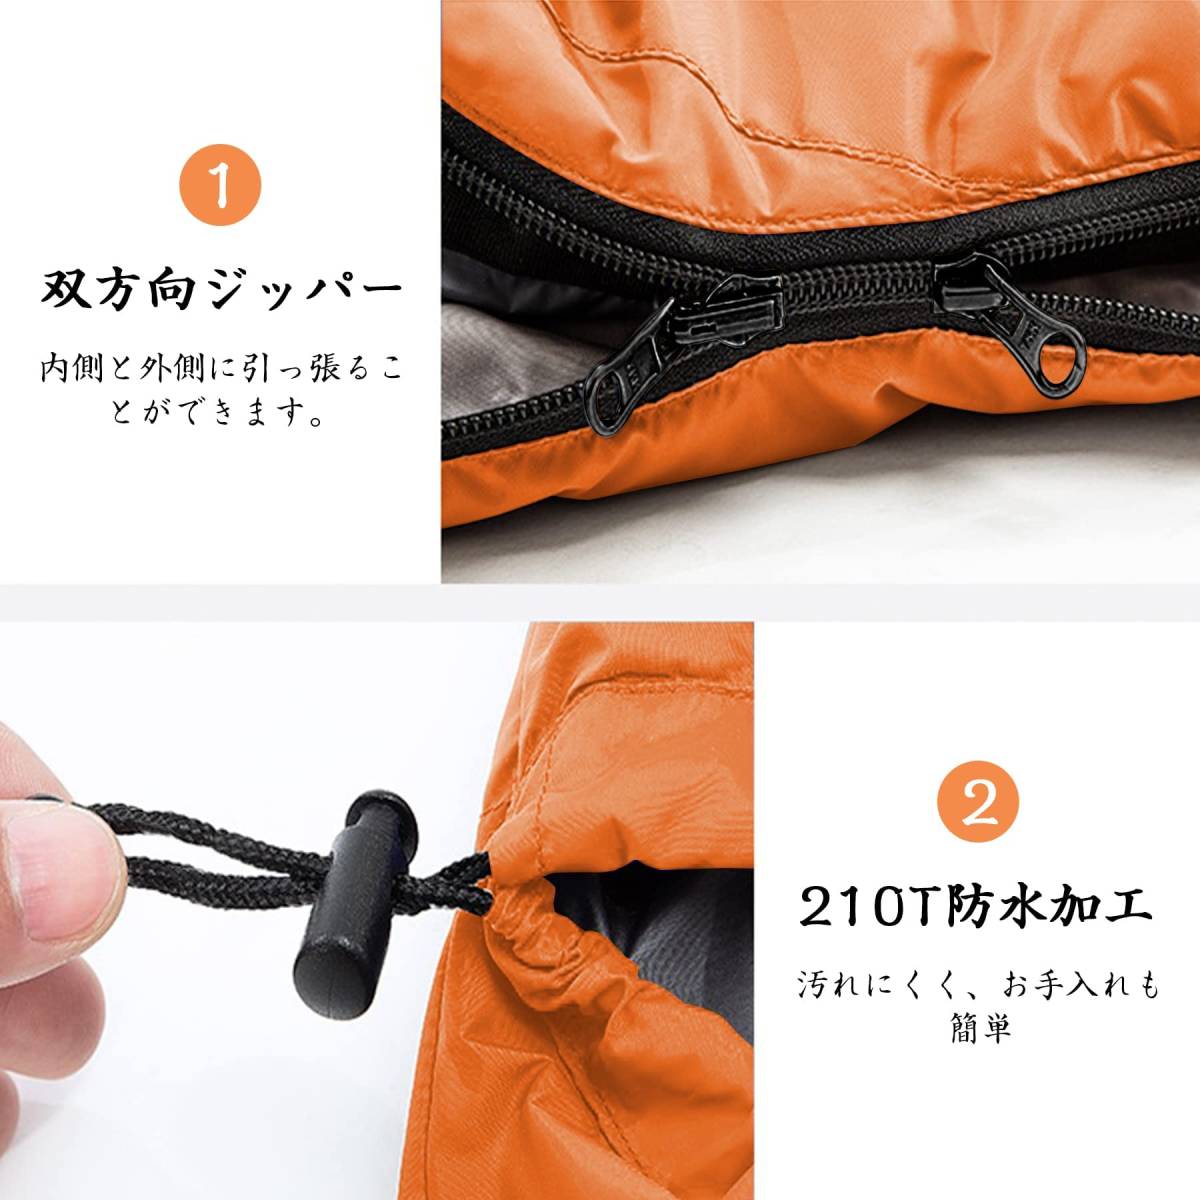  sleeping bag envelope type light weight heat insulation -15 times enduring cold 210T waterproof sleeping bag compact outdoor camp mountain climbing sleeping area in the vehicle disaster prevention for circle wash possible storage sack attaching 1kg